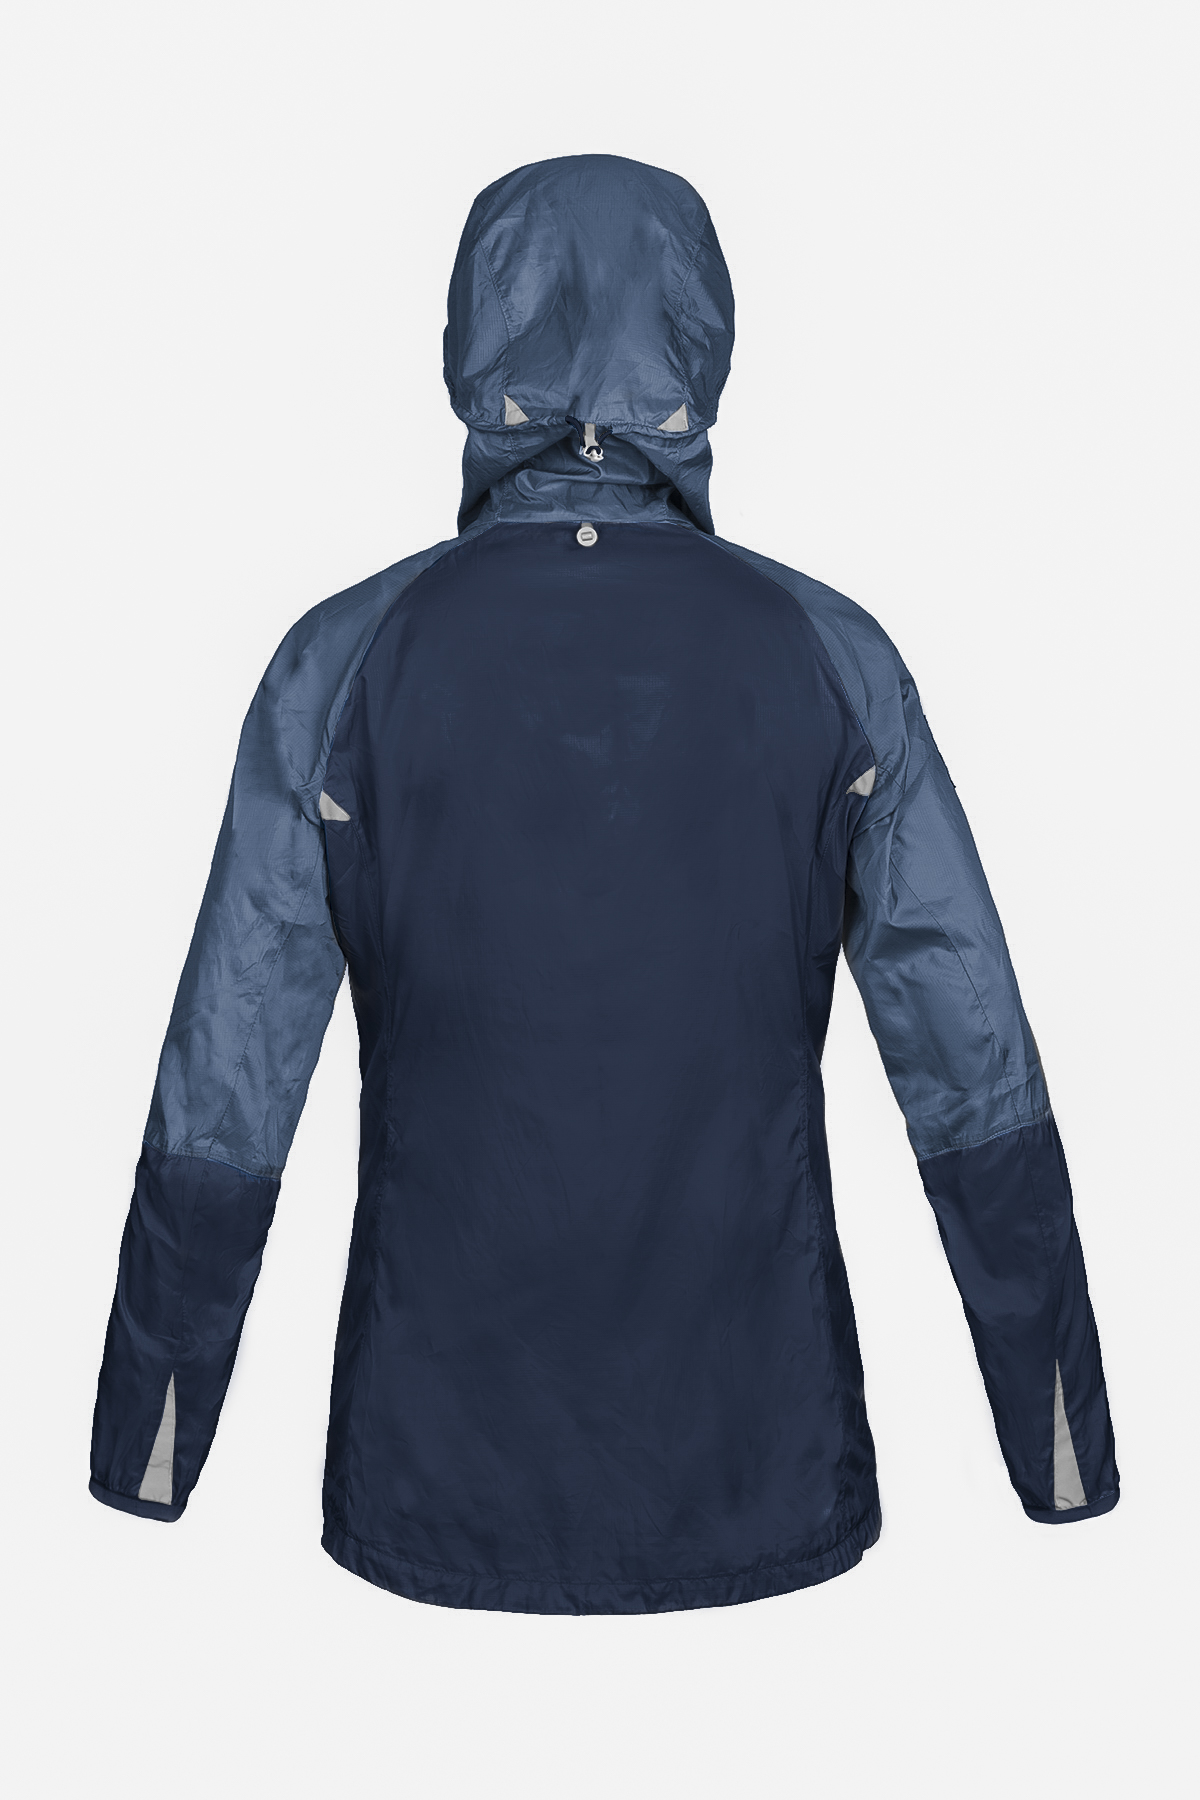 Buy a Paramo Women's Alize Windproof Jacket from The Mountaineer ...